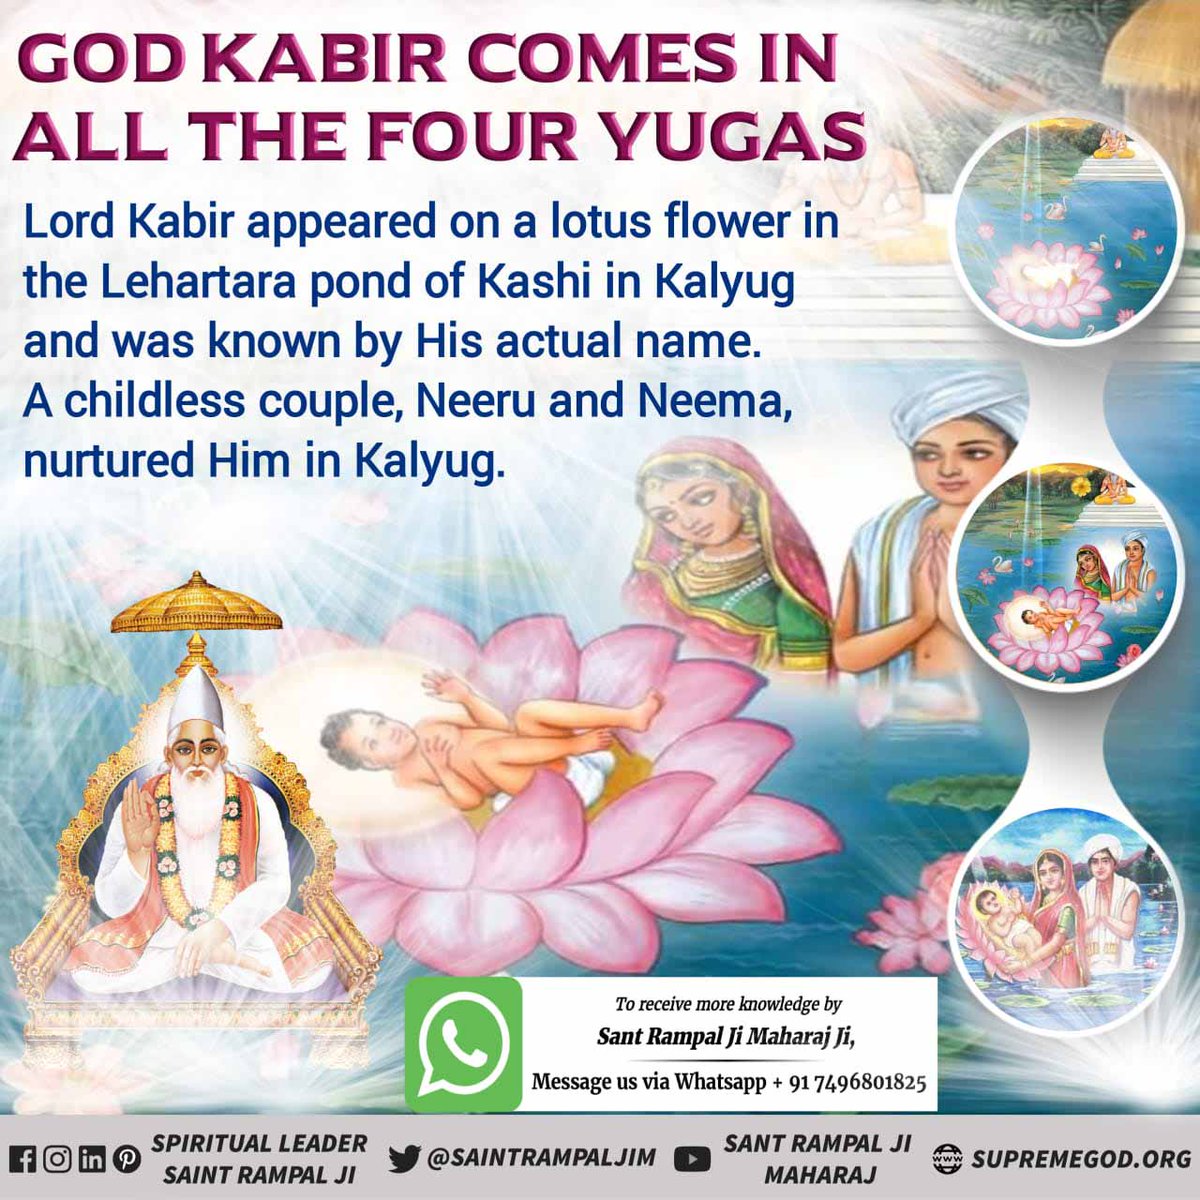 #अविनाशी_परमात्मा_कबीर
 💫At the time when all the saints abandon the scriptural methods and guide the devotees through arbitrary worship, then Lord Kabir himself comes as the messenger of his philosophy.💫
Sant Rampal Ji Maharaj